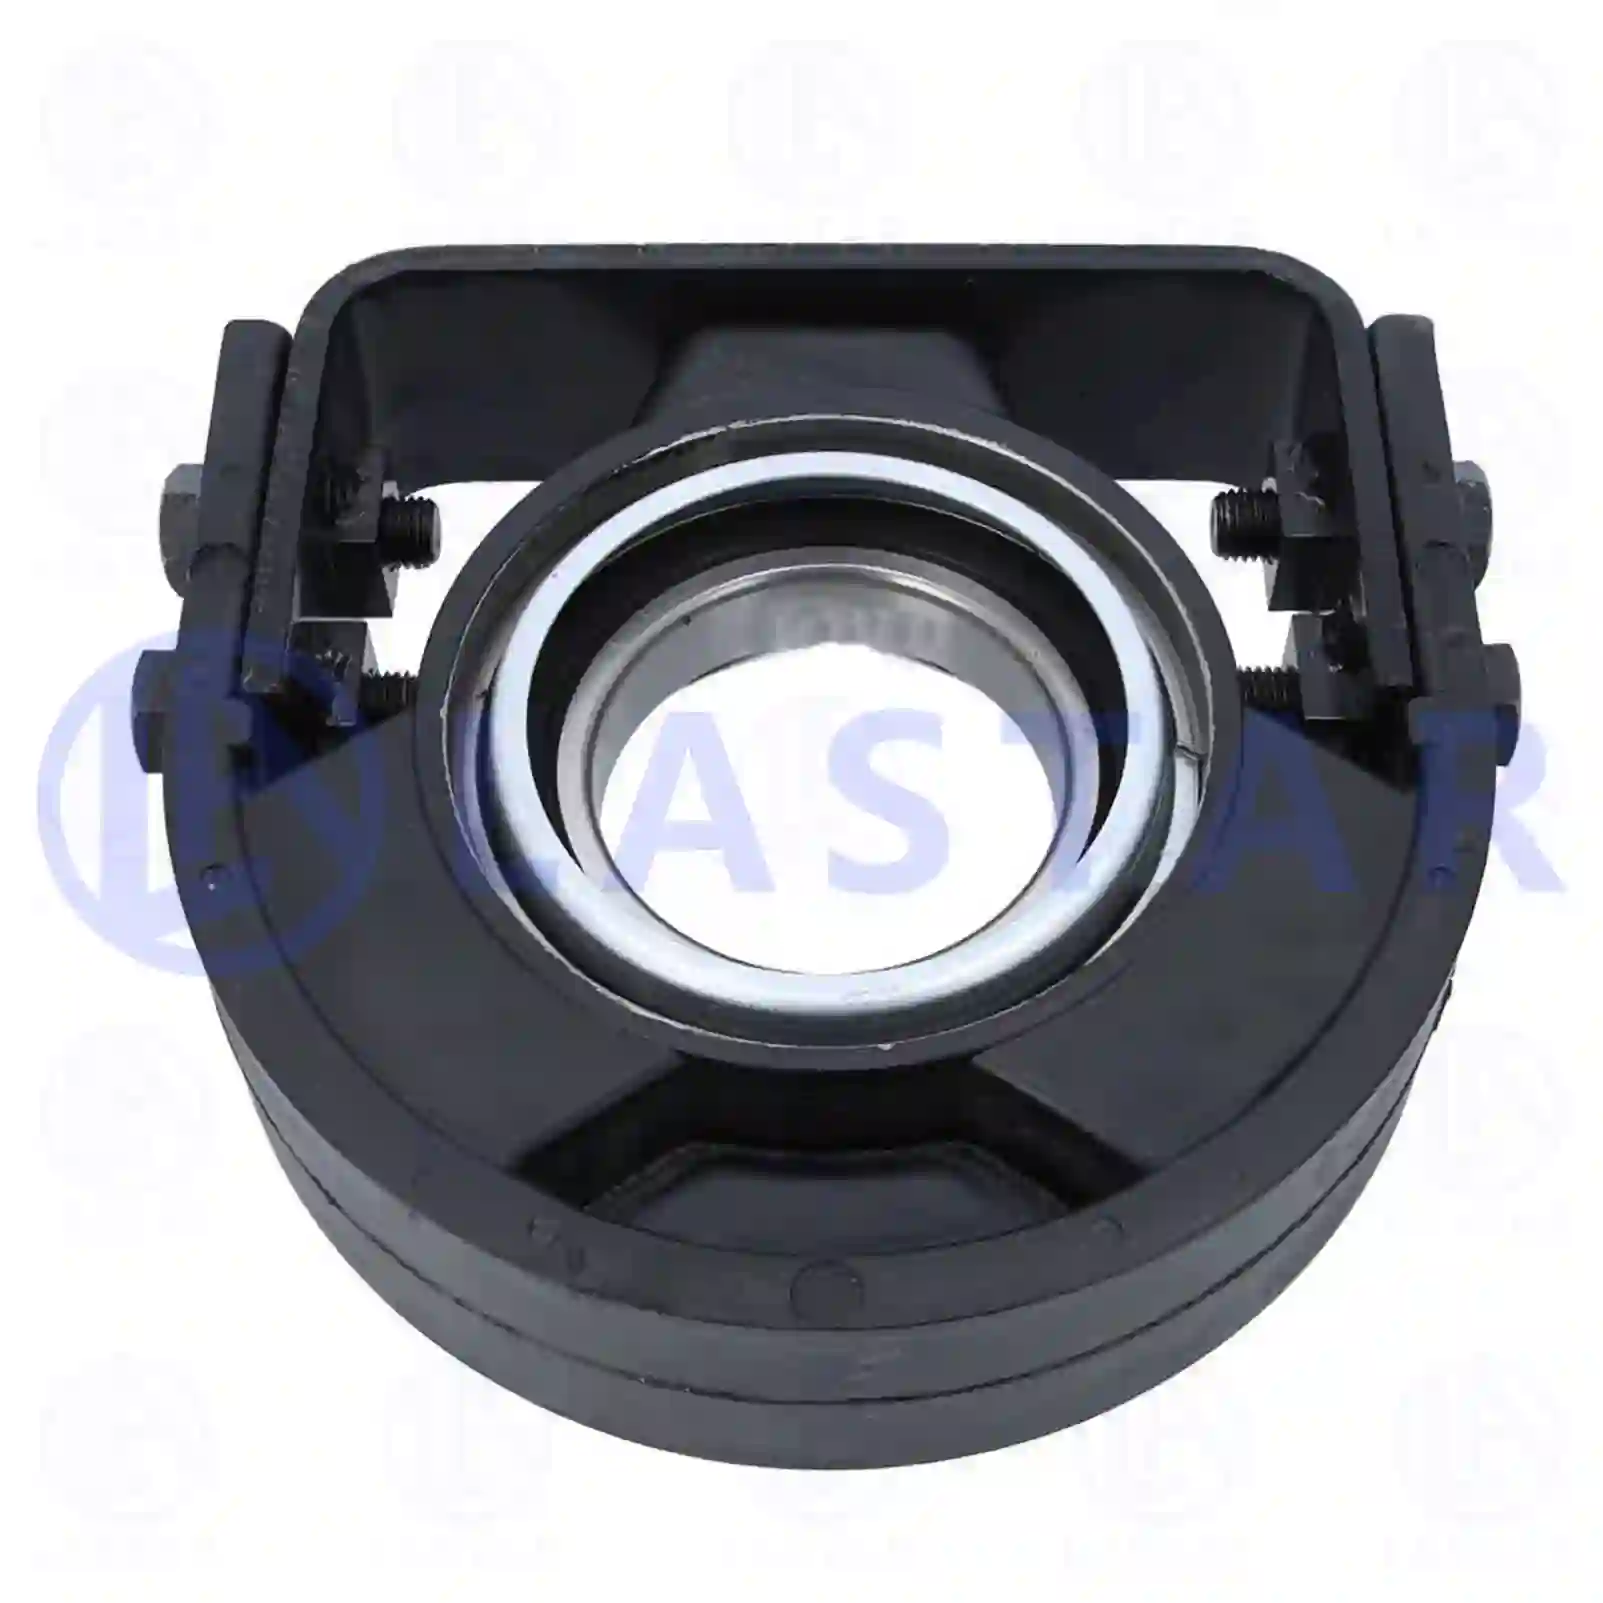 Support Bearing Center bearing, la no: 77734259 ,  oem no:6564110012, 6564110212, ZG02482-0008 Lastar Spare Part | Truck Spare Parts, Auotomotive Spare Parts